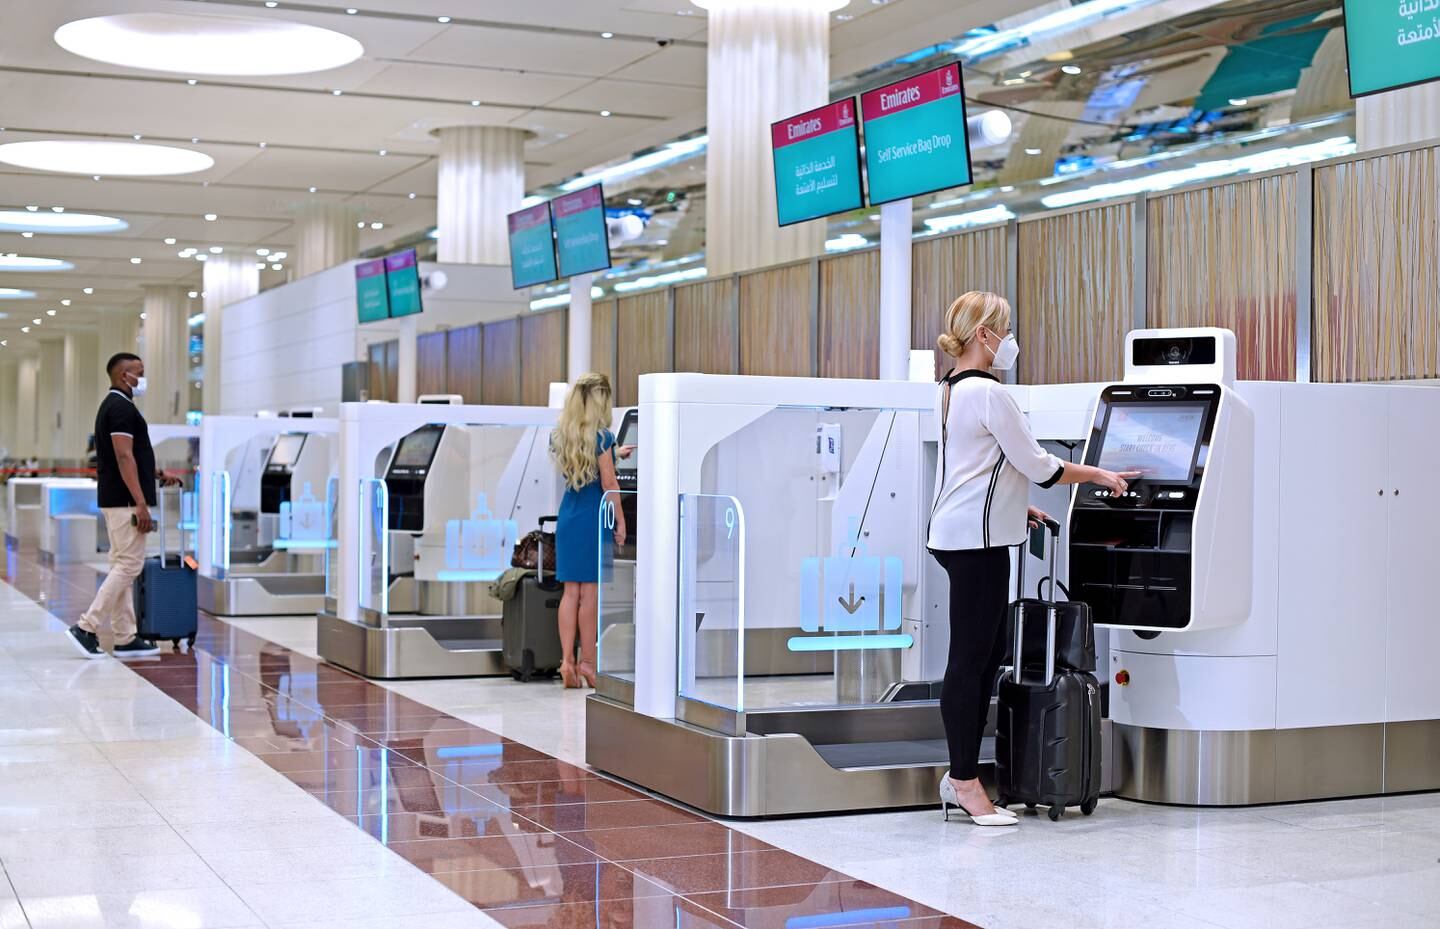 Travellers can use self check-in and bag drop facilities at Terminal 3 to check-in up to 24 hours before departure. Photo: Emirates